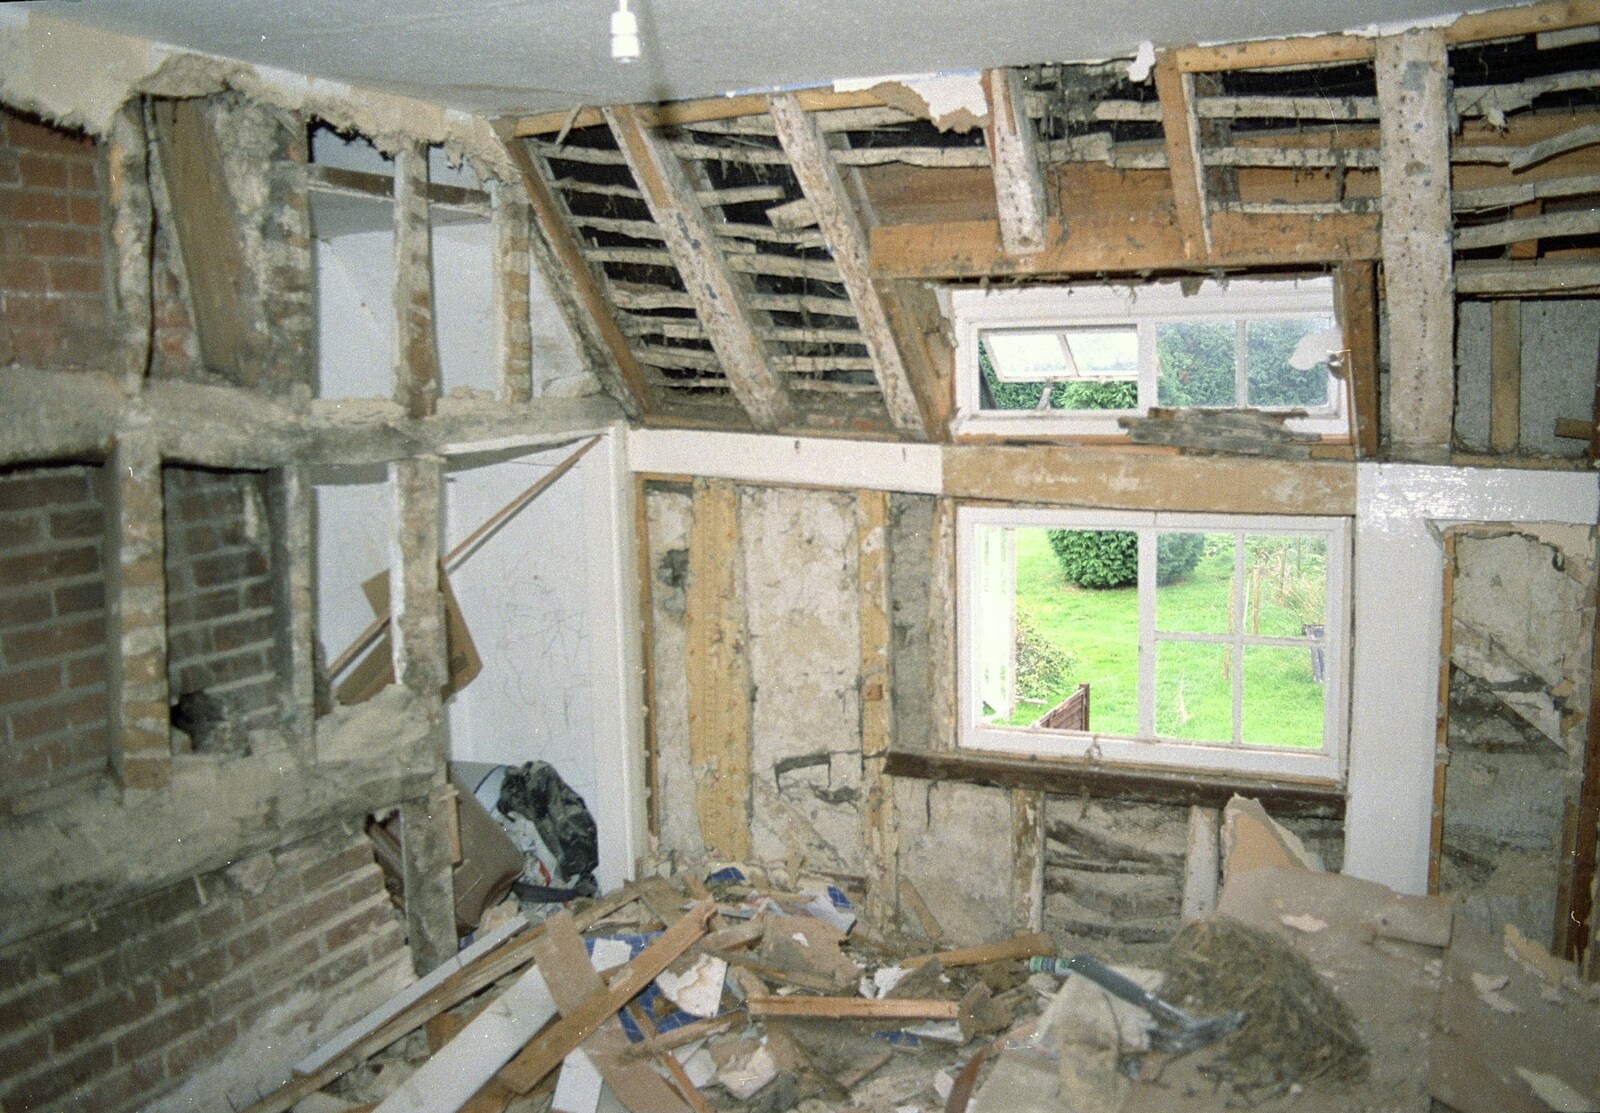 Another view of the demolition from Bedroom Demolition, Brome, Suffolk - 15th May 1995